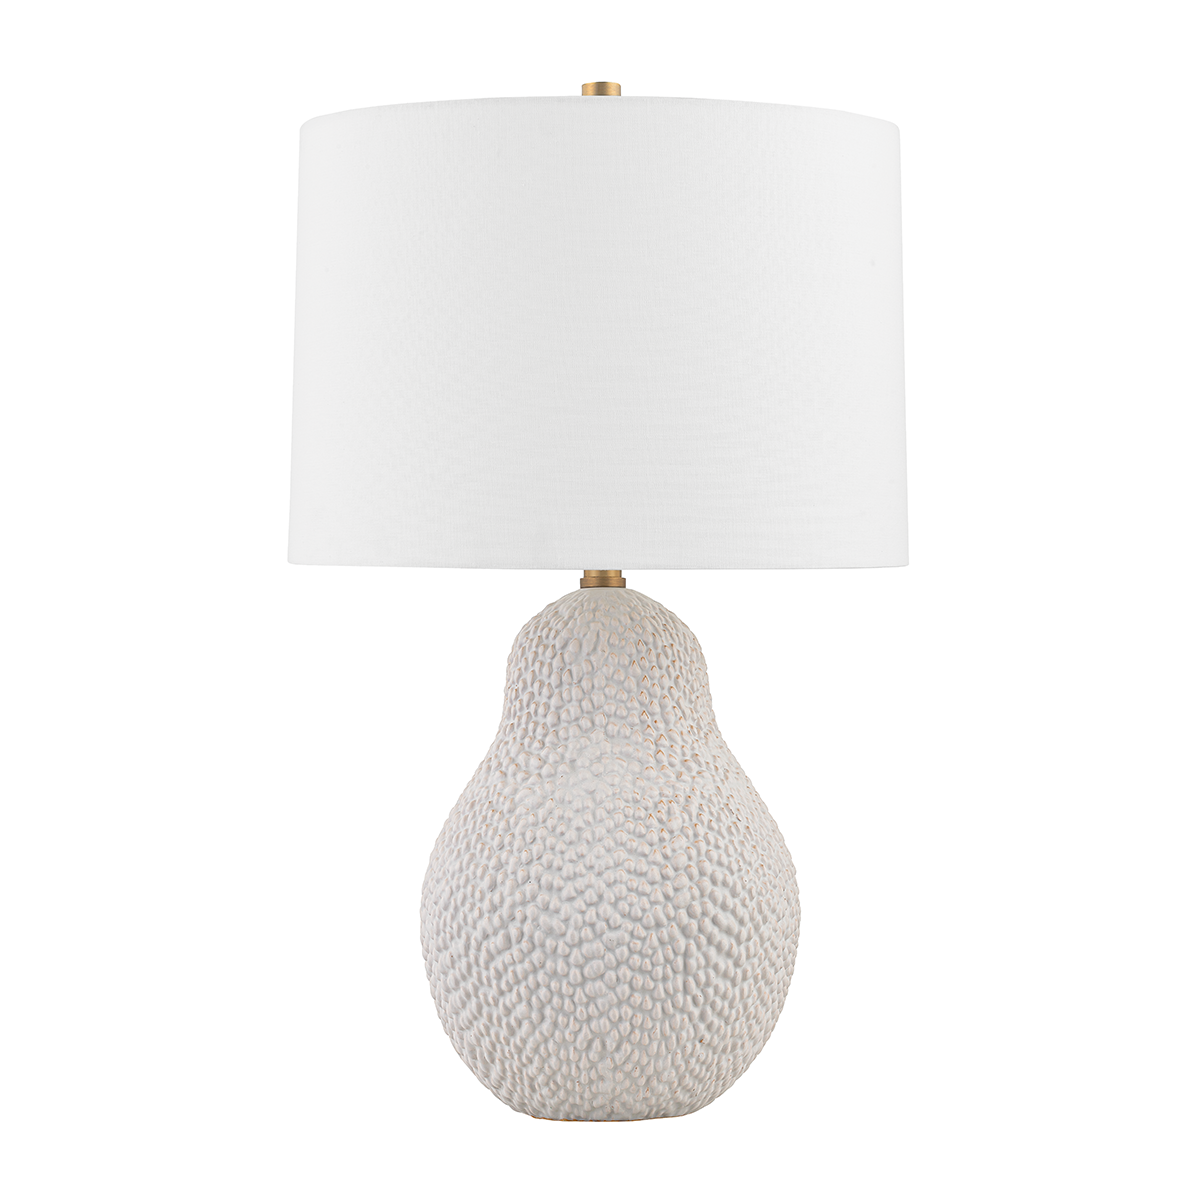 Troy Lighting CRATER Table Lamp Table Lamp Troy Lighting PATINA BRASS/CERAMIC SATIN WHITE GOLD 16x16x25.5 